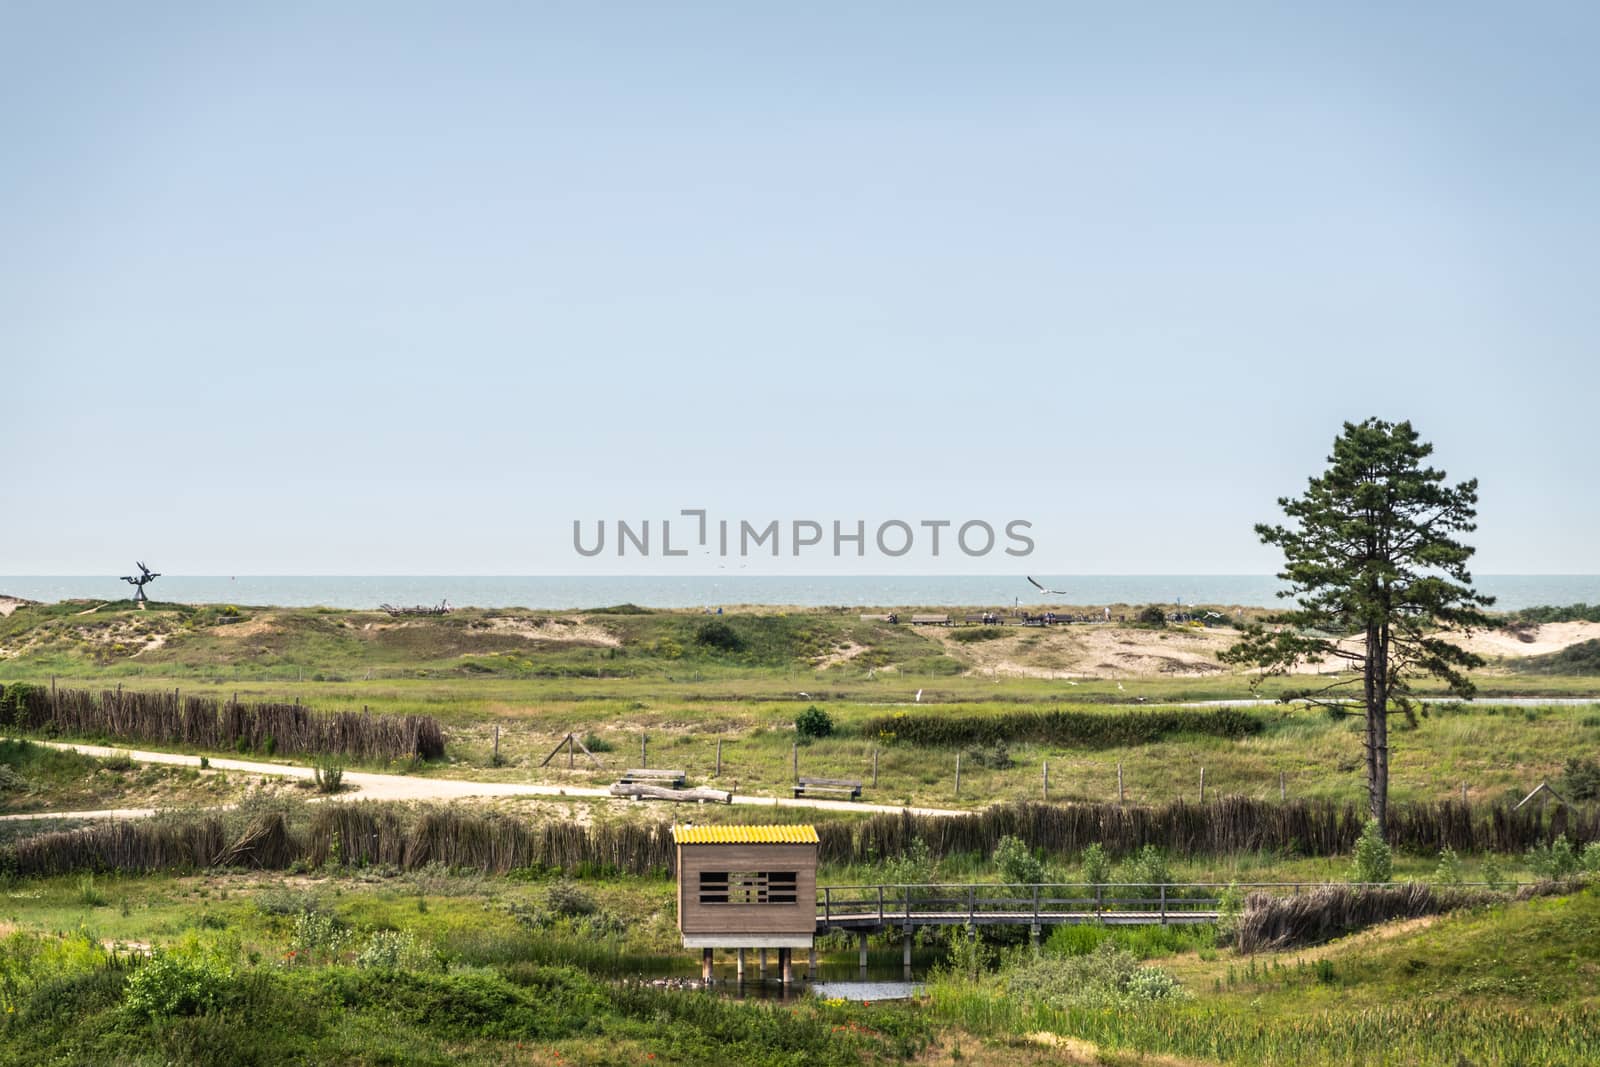 Knokke-Heist, Flanders, Belgium -  June 18, 2019: Zwin Bird Refuge. Landscape with dunes and Nord Sea behind. Lookout hut and Hare statue in the far distance. Green foliage and light blue sky.